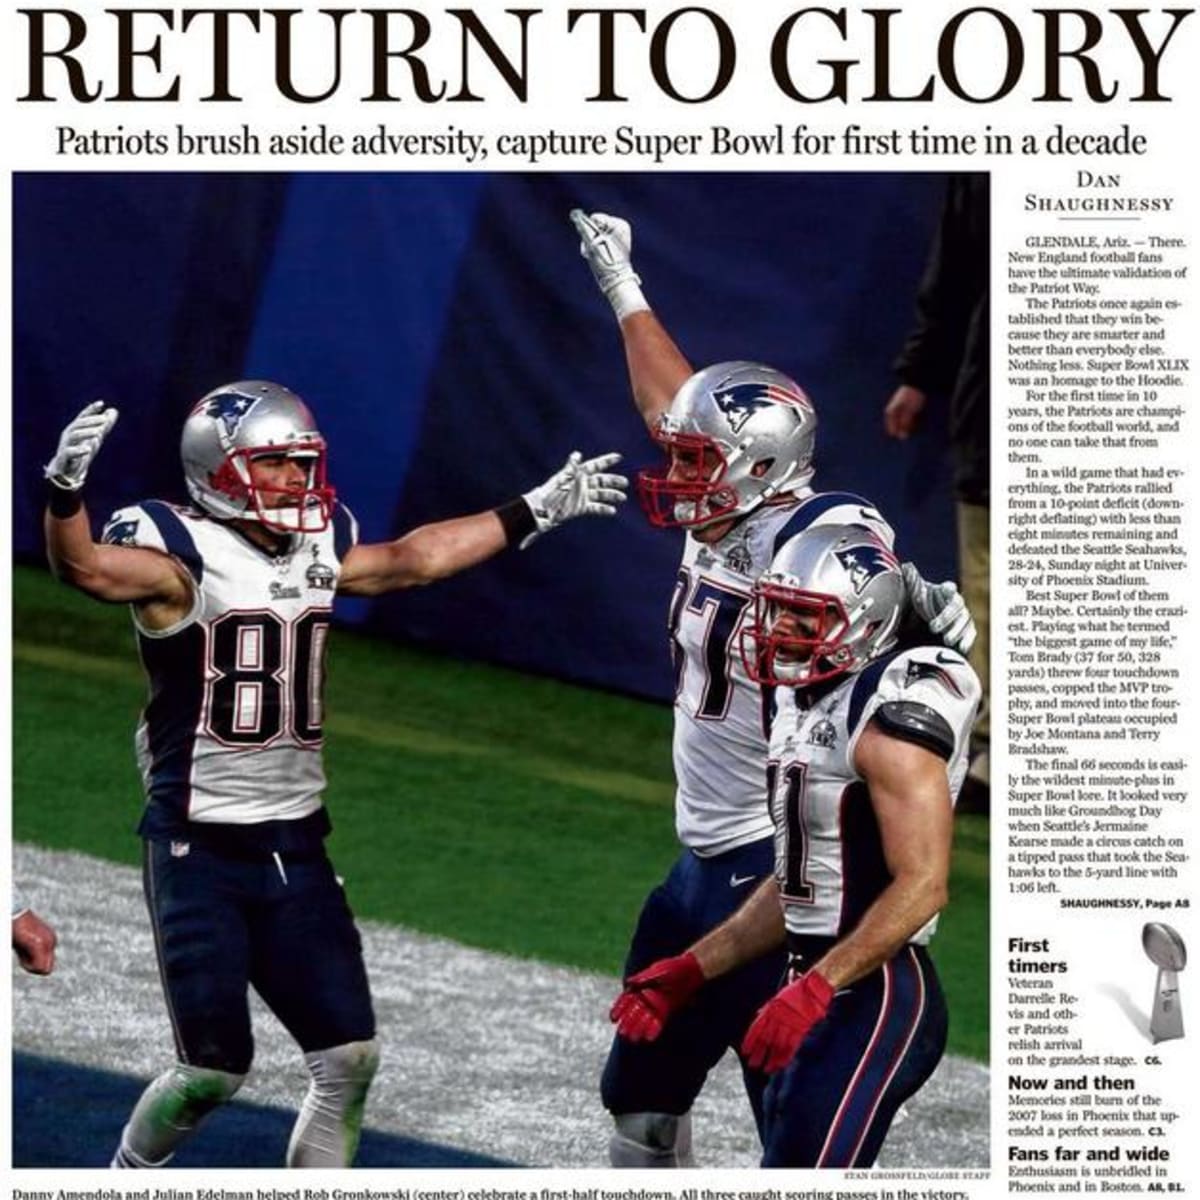 Super Bowl 2015 Patriots overtake Seahawks to reign as Super Bowl champions  - CBS News